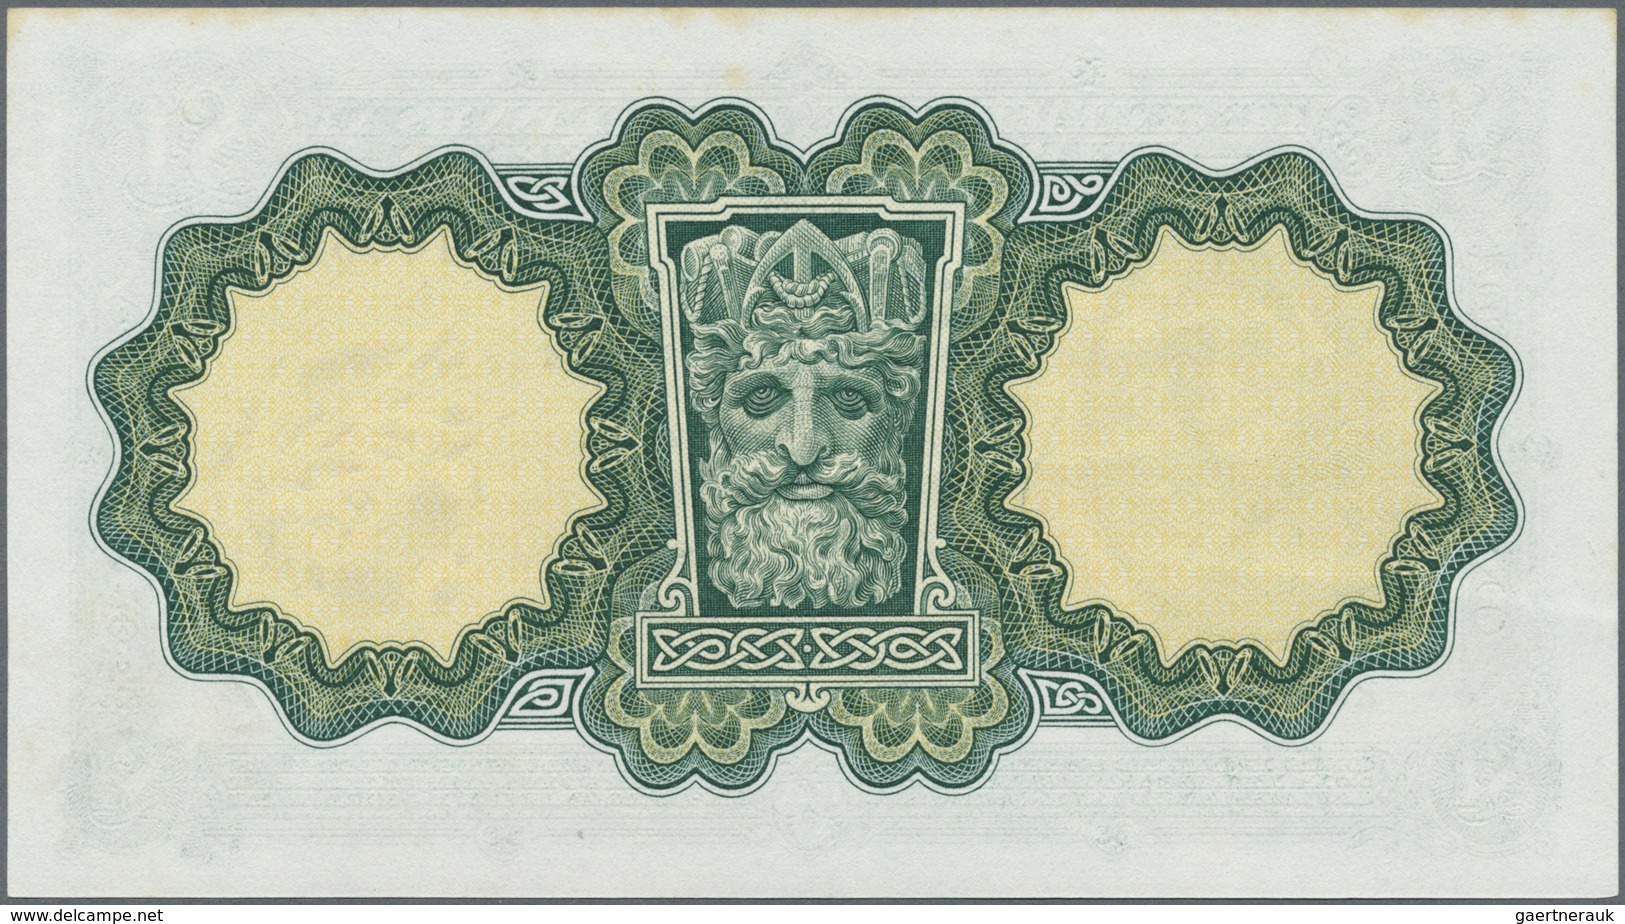 Ireland / Irland: Central Bank Of Ireland 1 Pound September 2nd 1959, P.57d For Type But This One Wi - Ireland